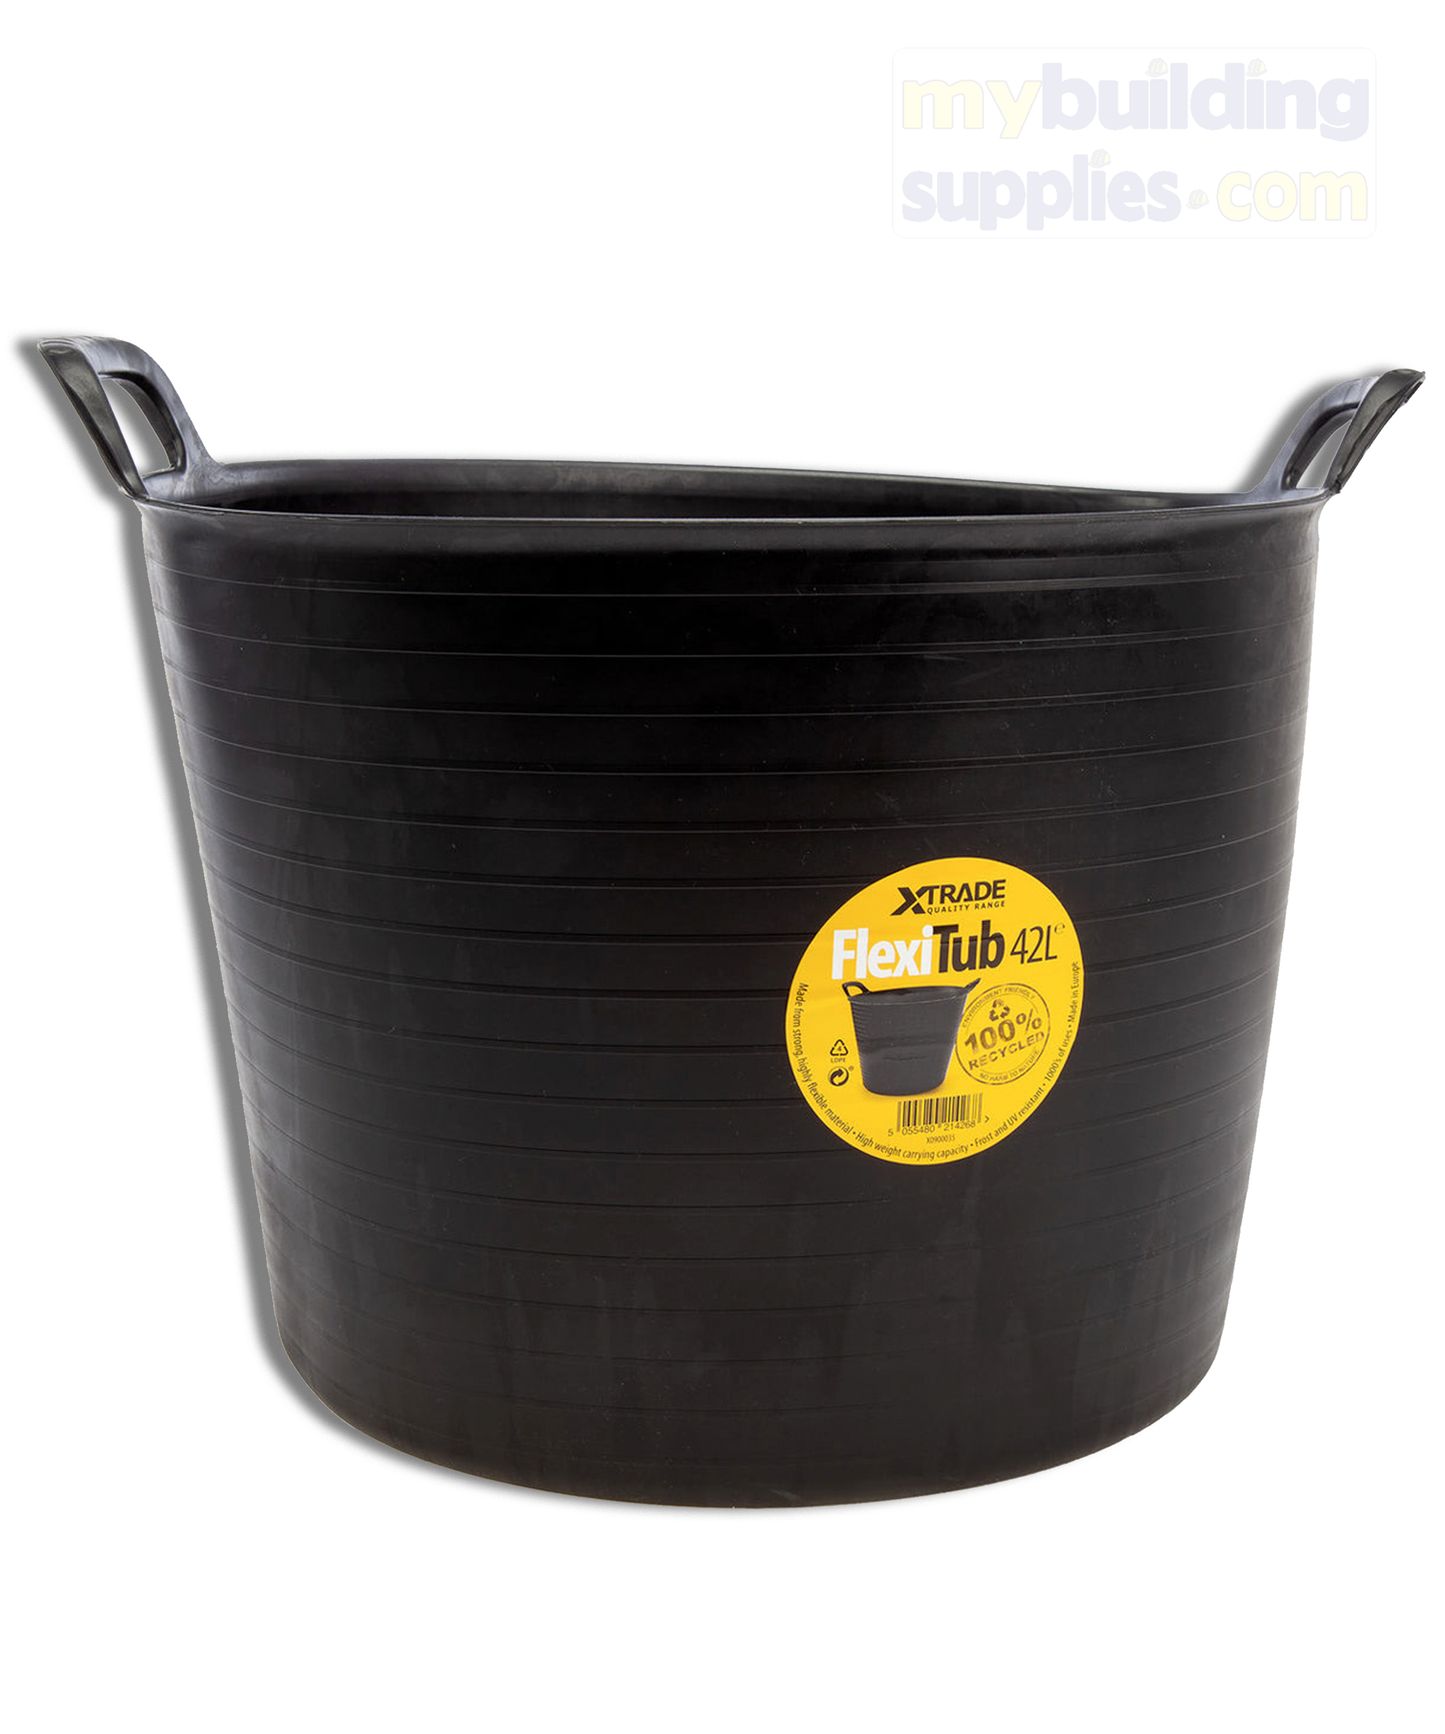 XTrade X0900035 FlexiTub Black 42L - 100% Recycled Material The XTrade X0900035 is a 42 Litre capacity, Black Flexible Tub with an almost endless amount of uses.  Made from a strong highly flexible material. High weight carrying capacity Frost and UV resistant 1000s of uses.